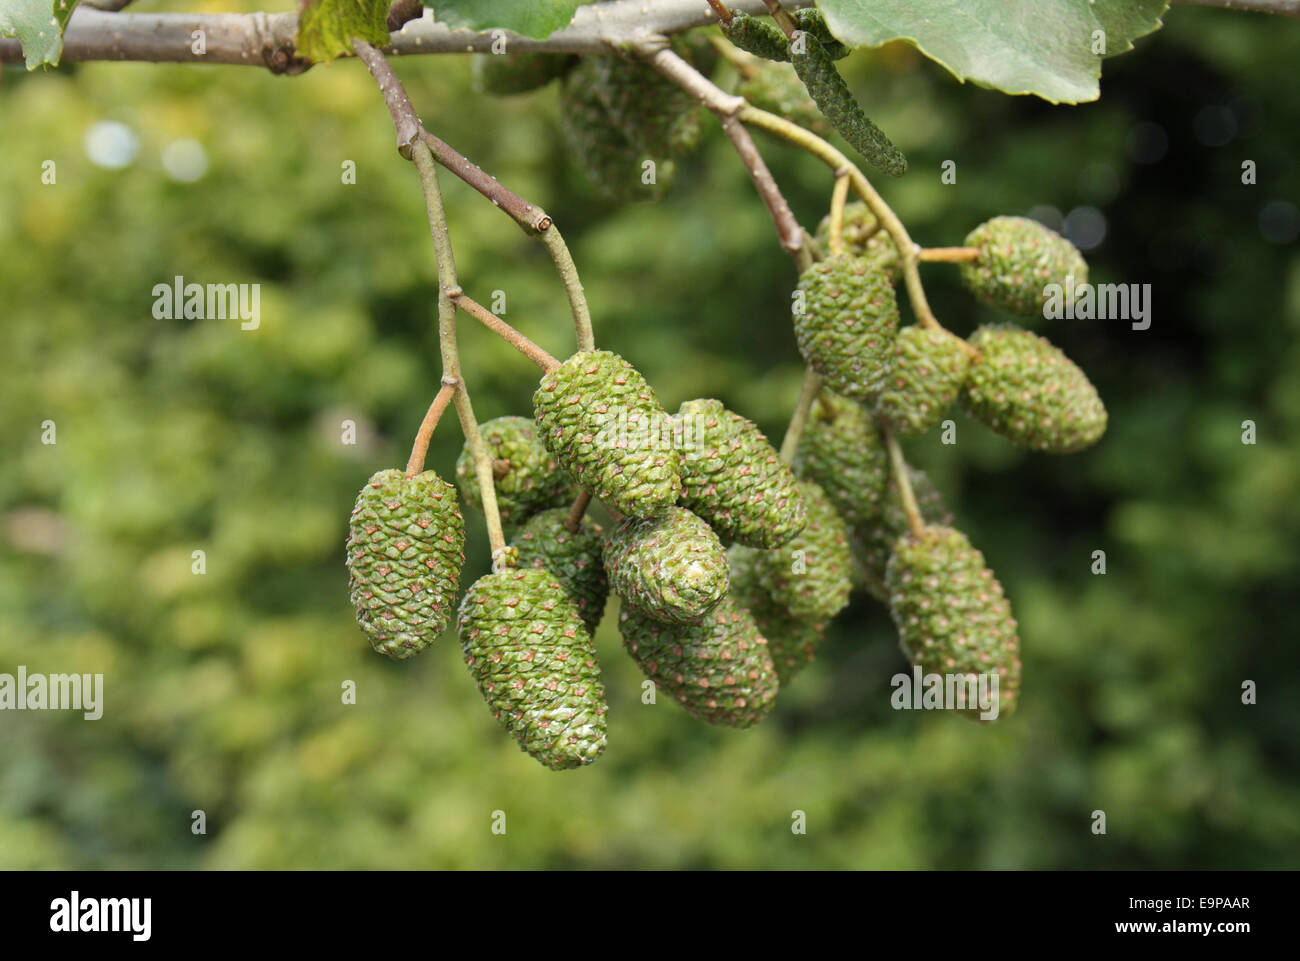 Common Alder (Alnus glutinosa) close-up of cones, growing in hedgerow beside ditch, Mendlesham, Suffolk, England, August Stock Photo